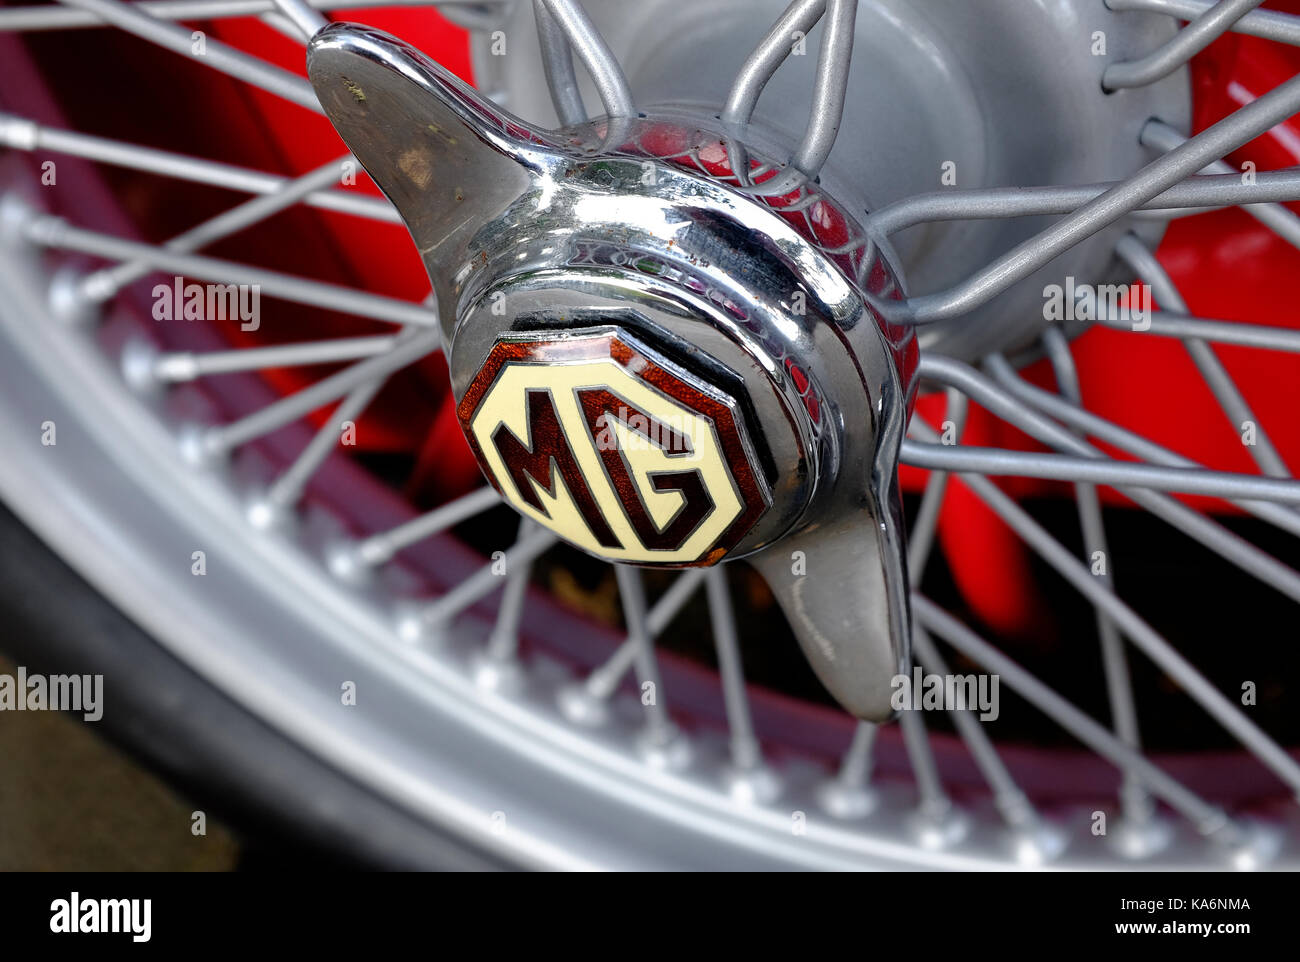 old MG sports car wire wheel Stock Photo